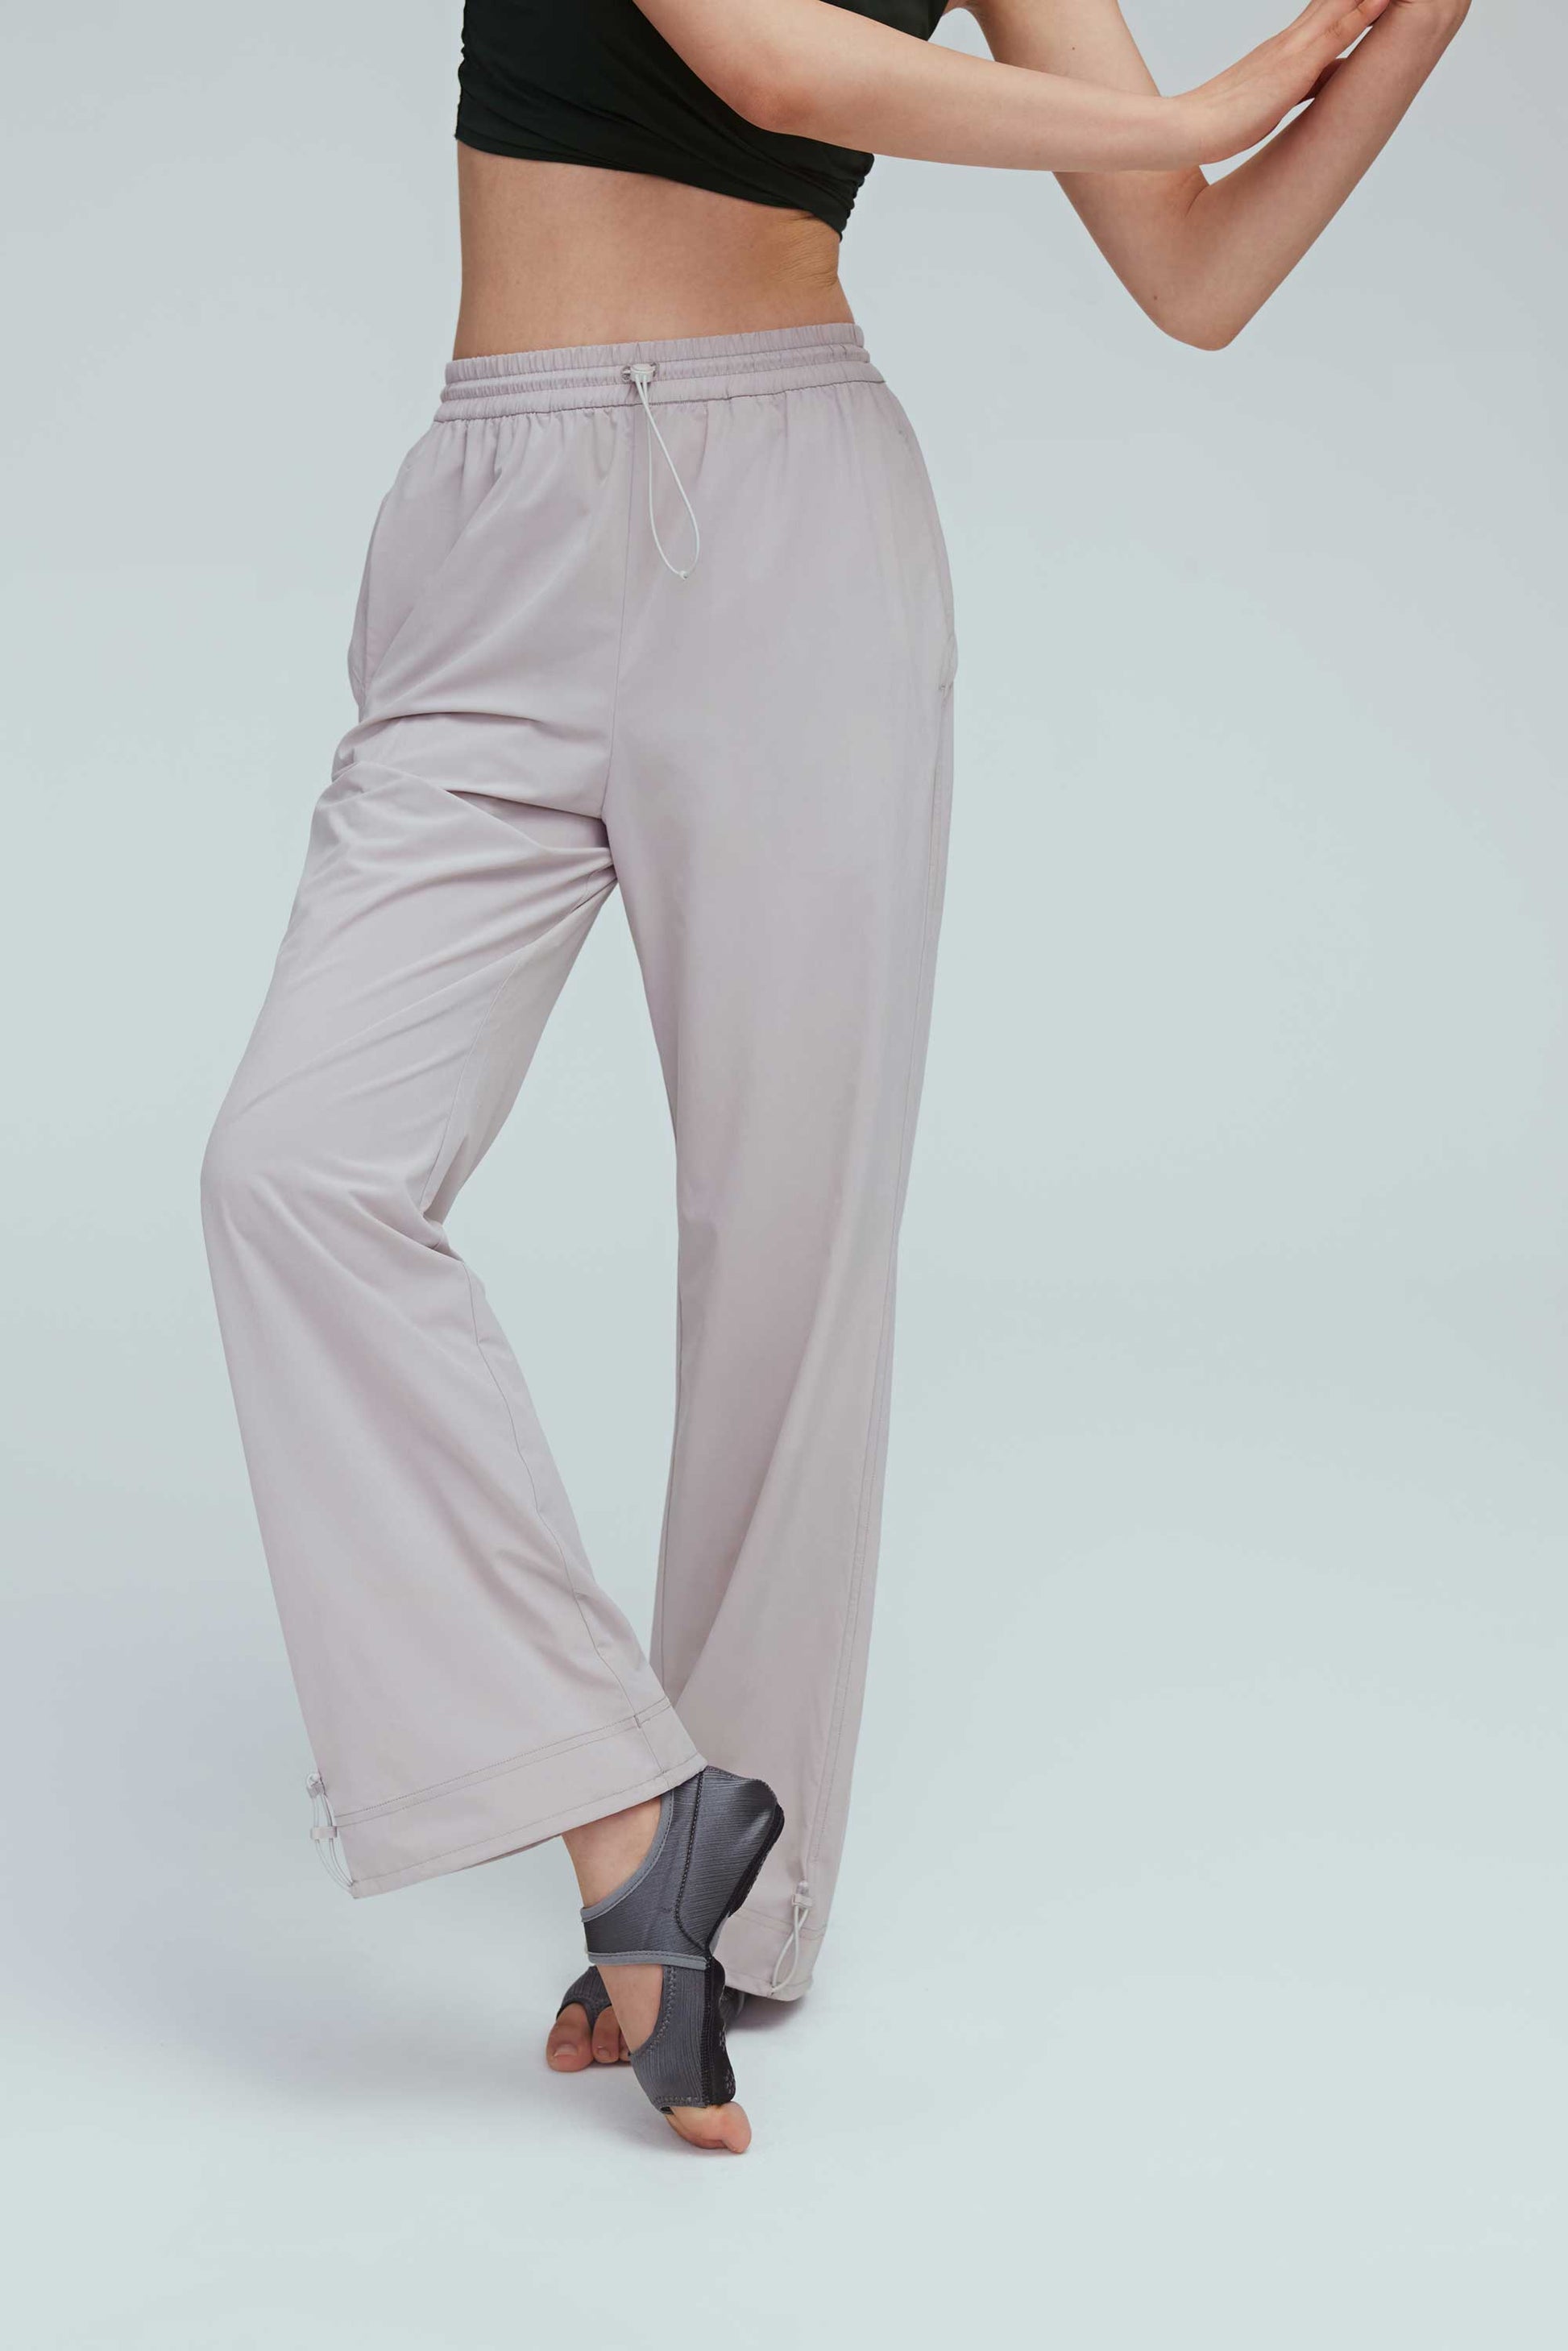 Lole, Pants & Jumpsuits, Lol Womens Gray Relaxed Fit Super Soft Joggers  Womens Size Small New